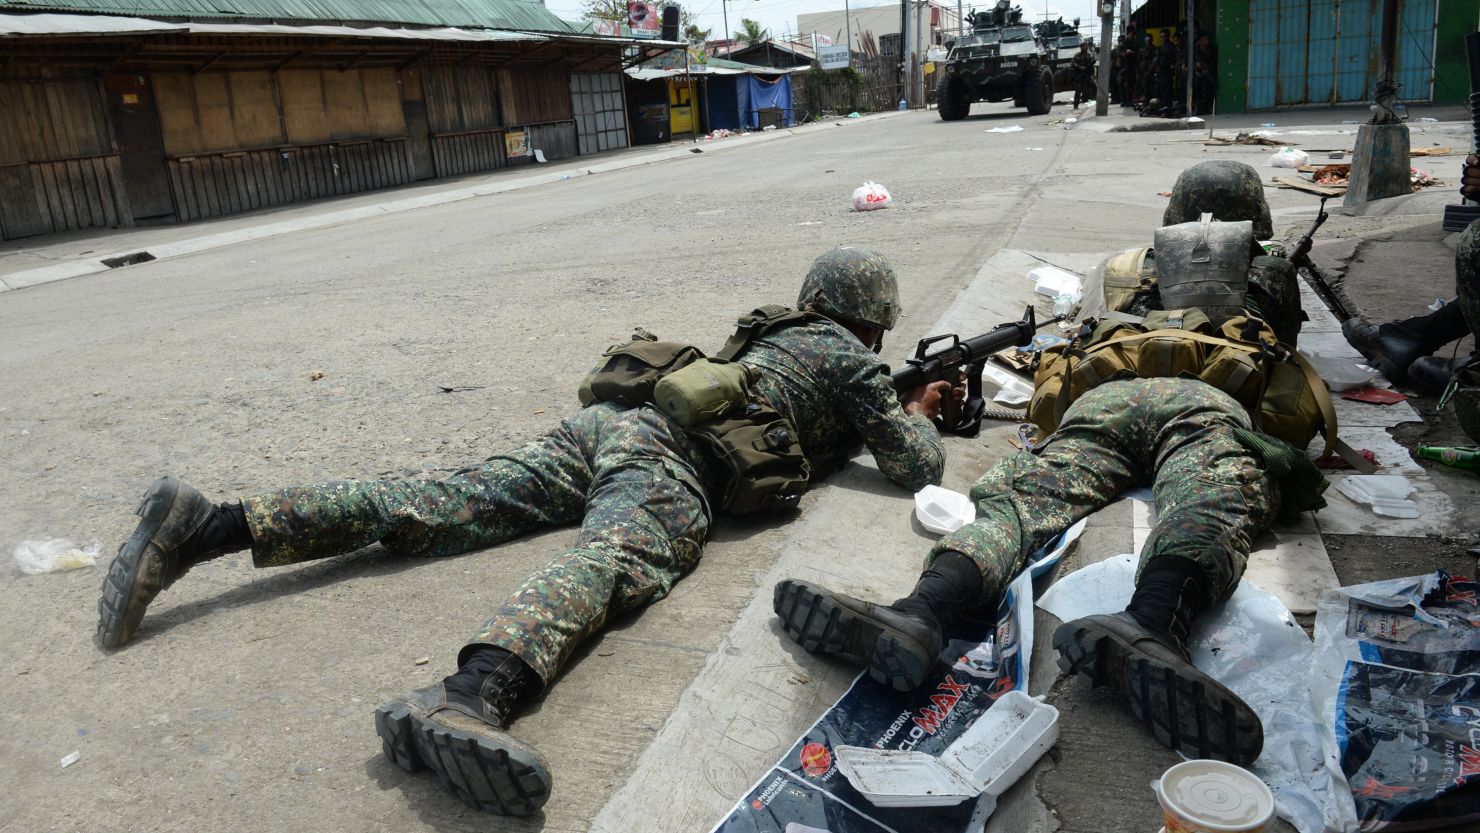 Government soldiers take cover from rebel sniper fire during heavy fighting  in Zamboanga City on September 12, 2013.